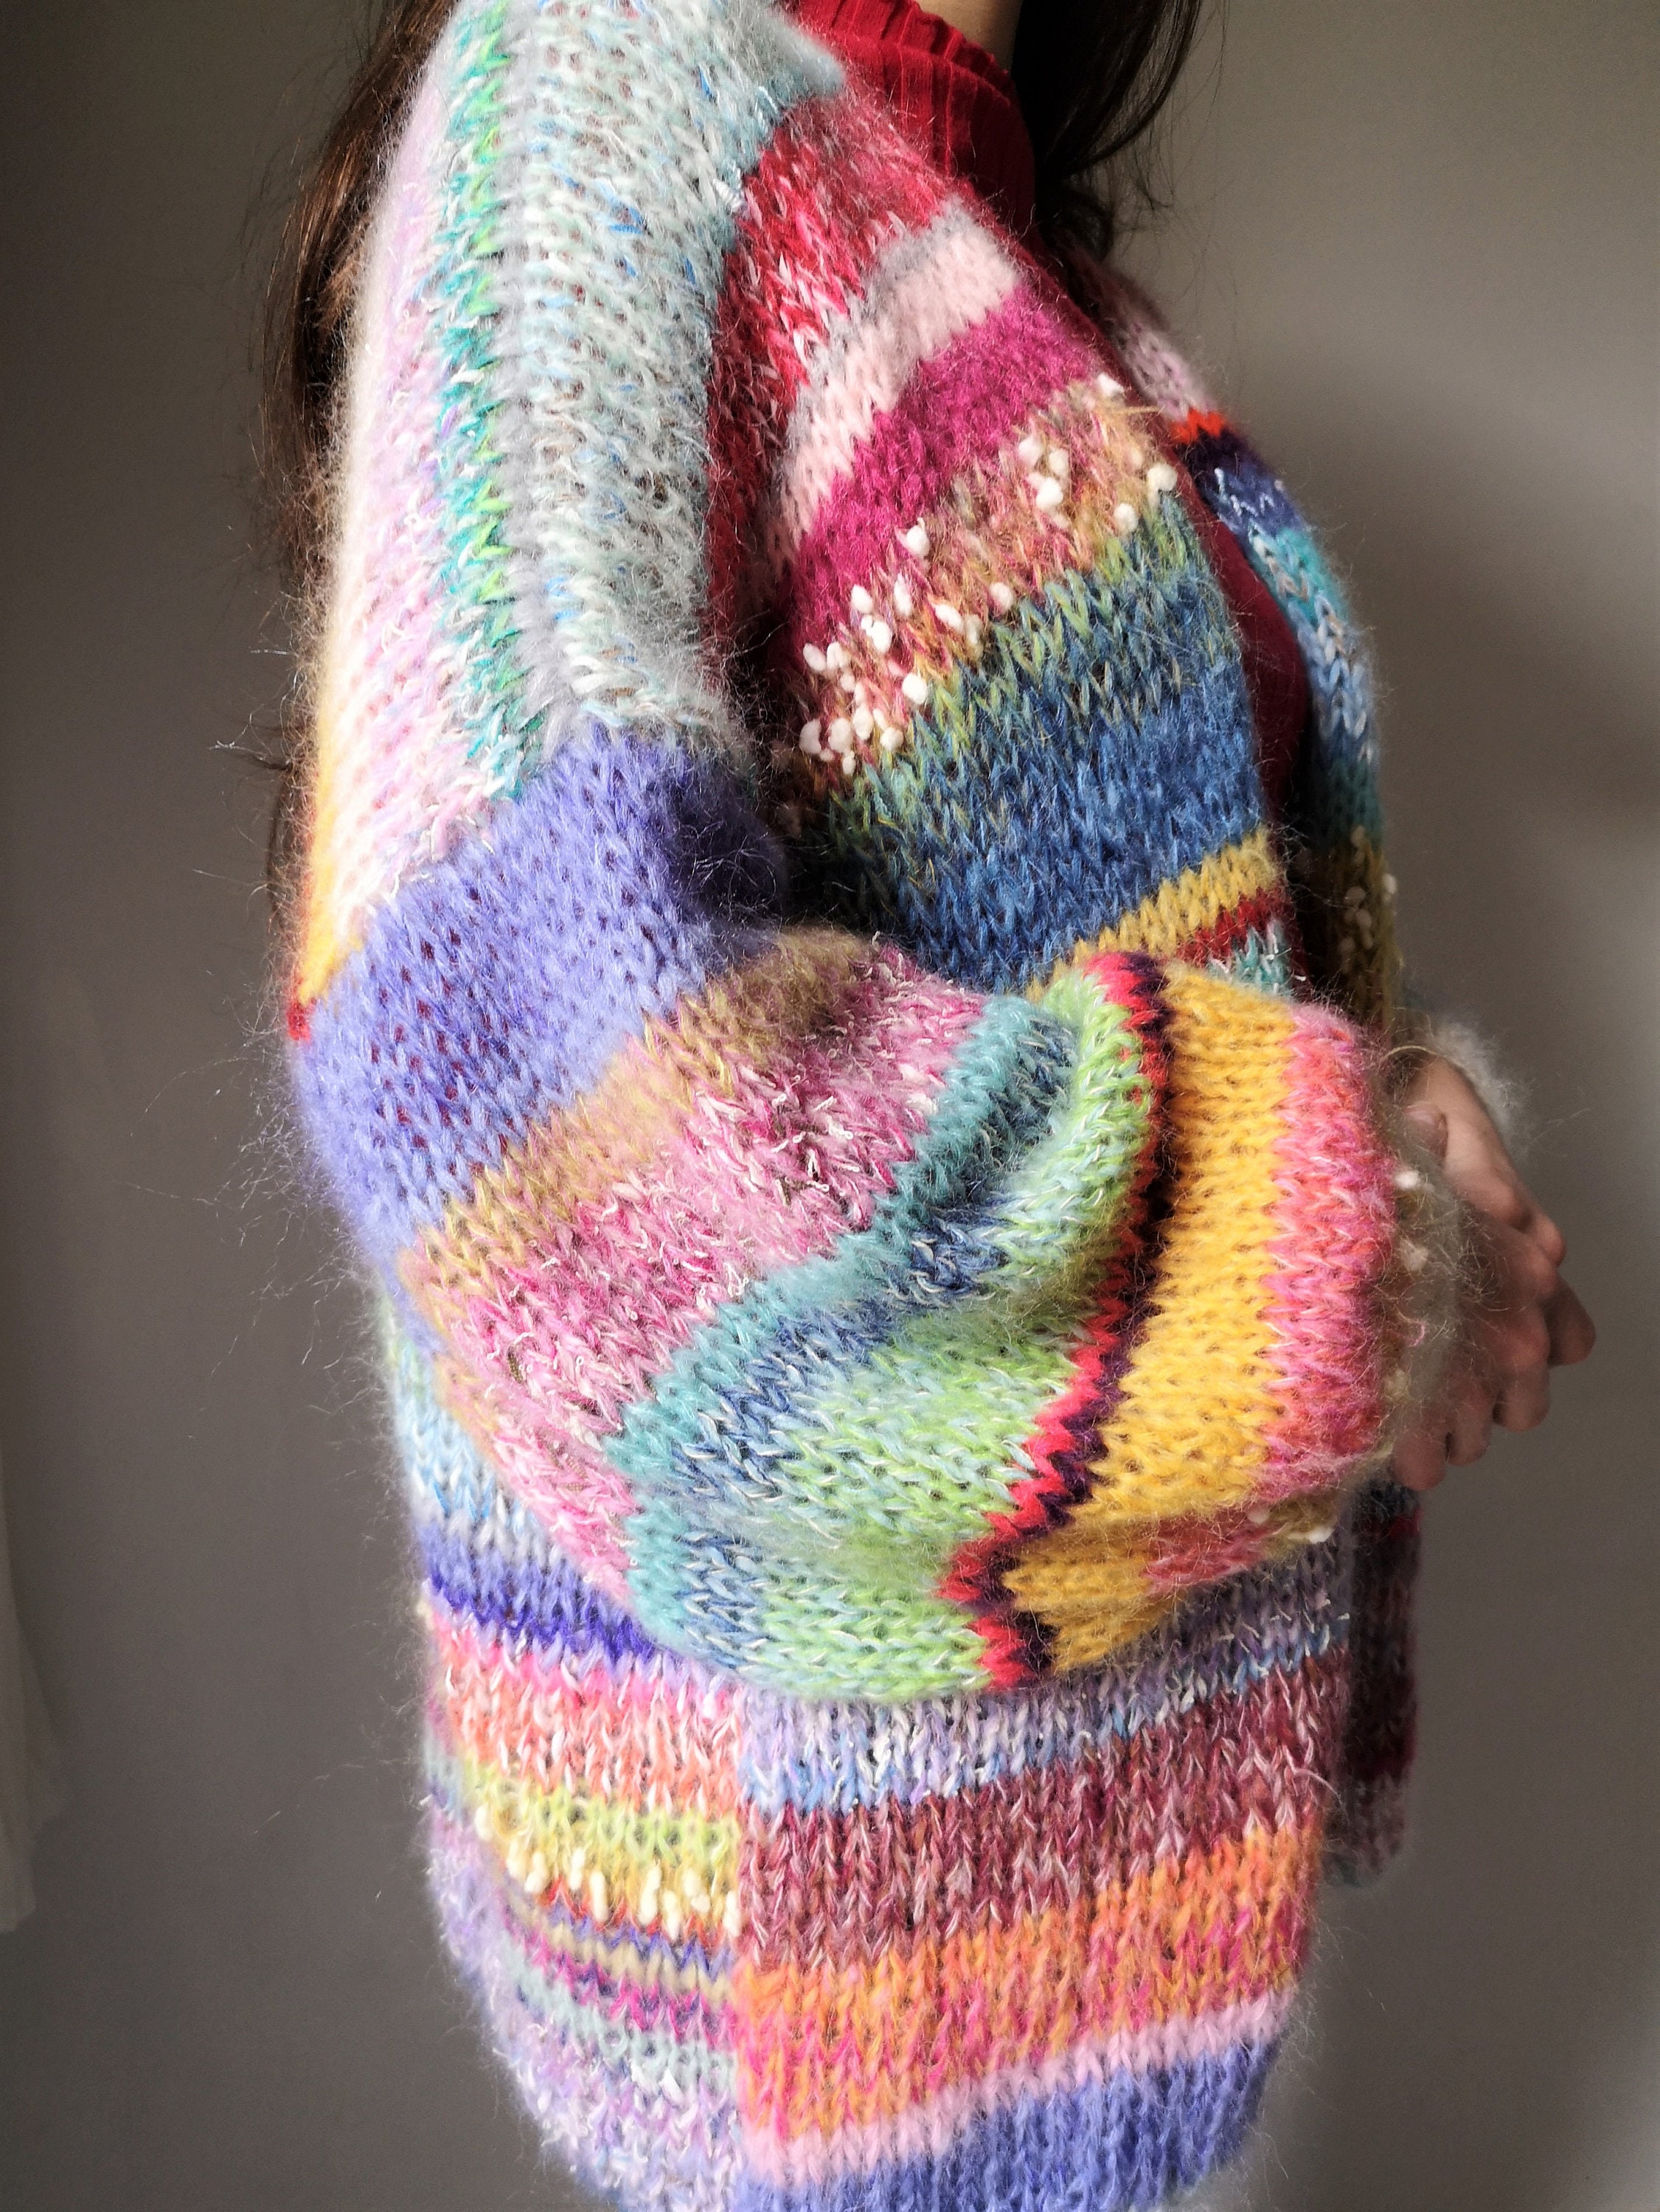 To Orderhot Mohair Cardiganmulticolored - Etsy